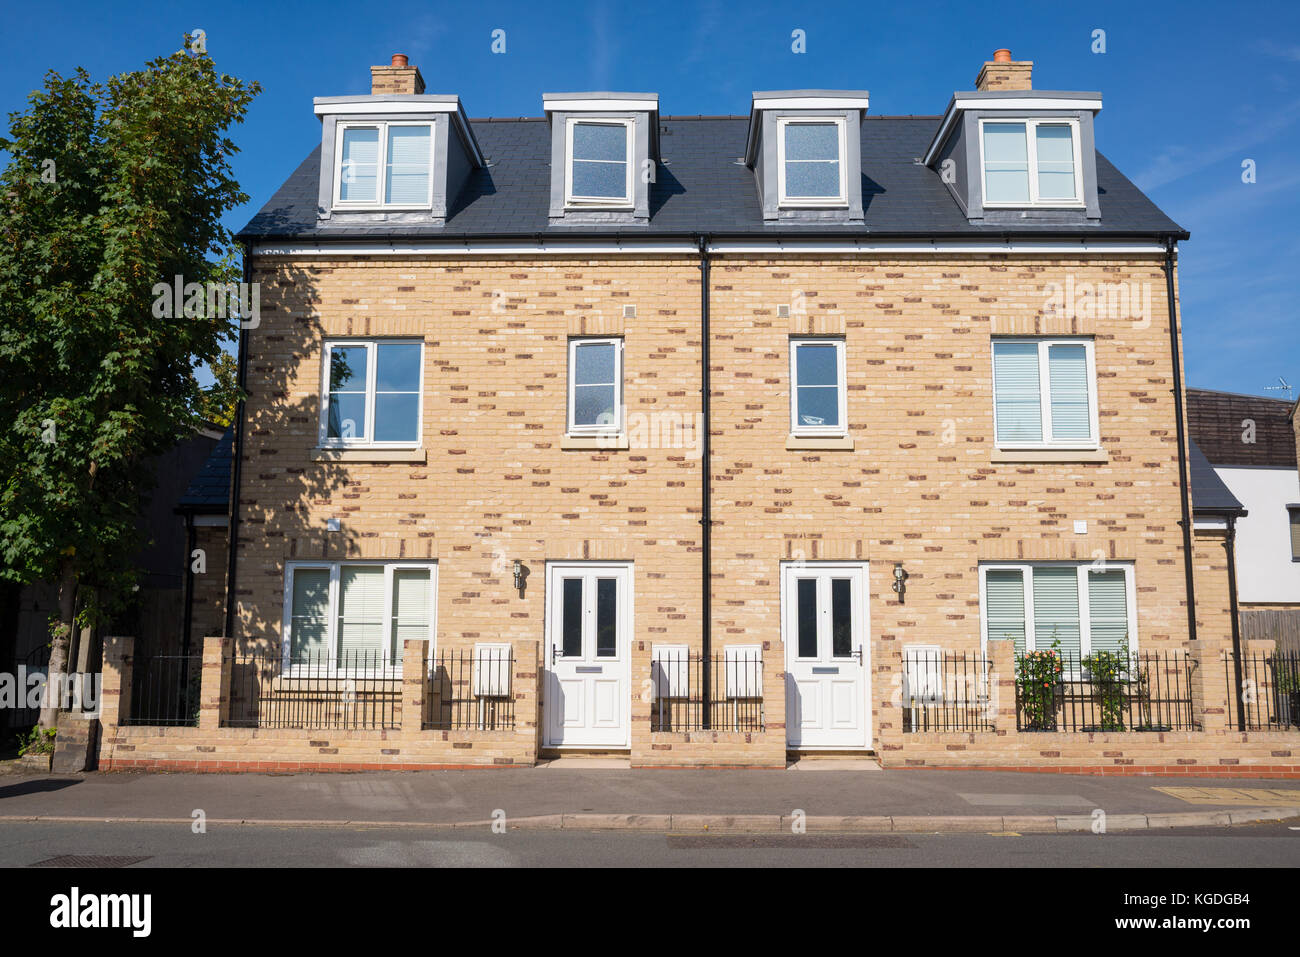 Newly built three floor semi detached houses on an empty street in England, UK Stock Photo